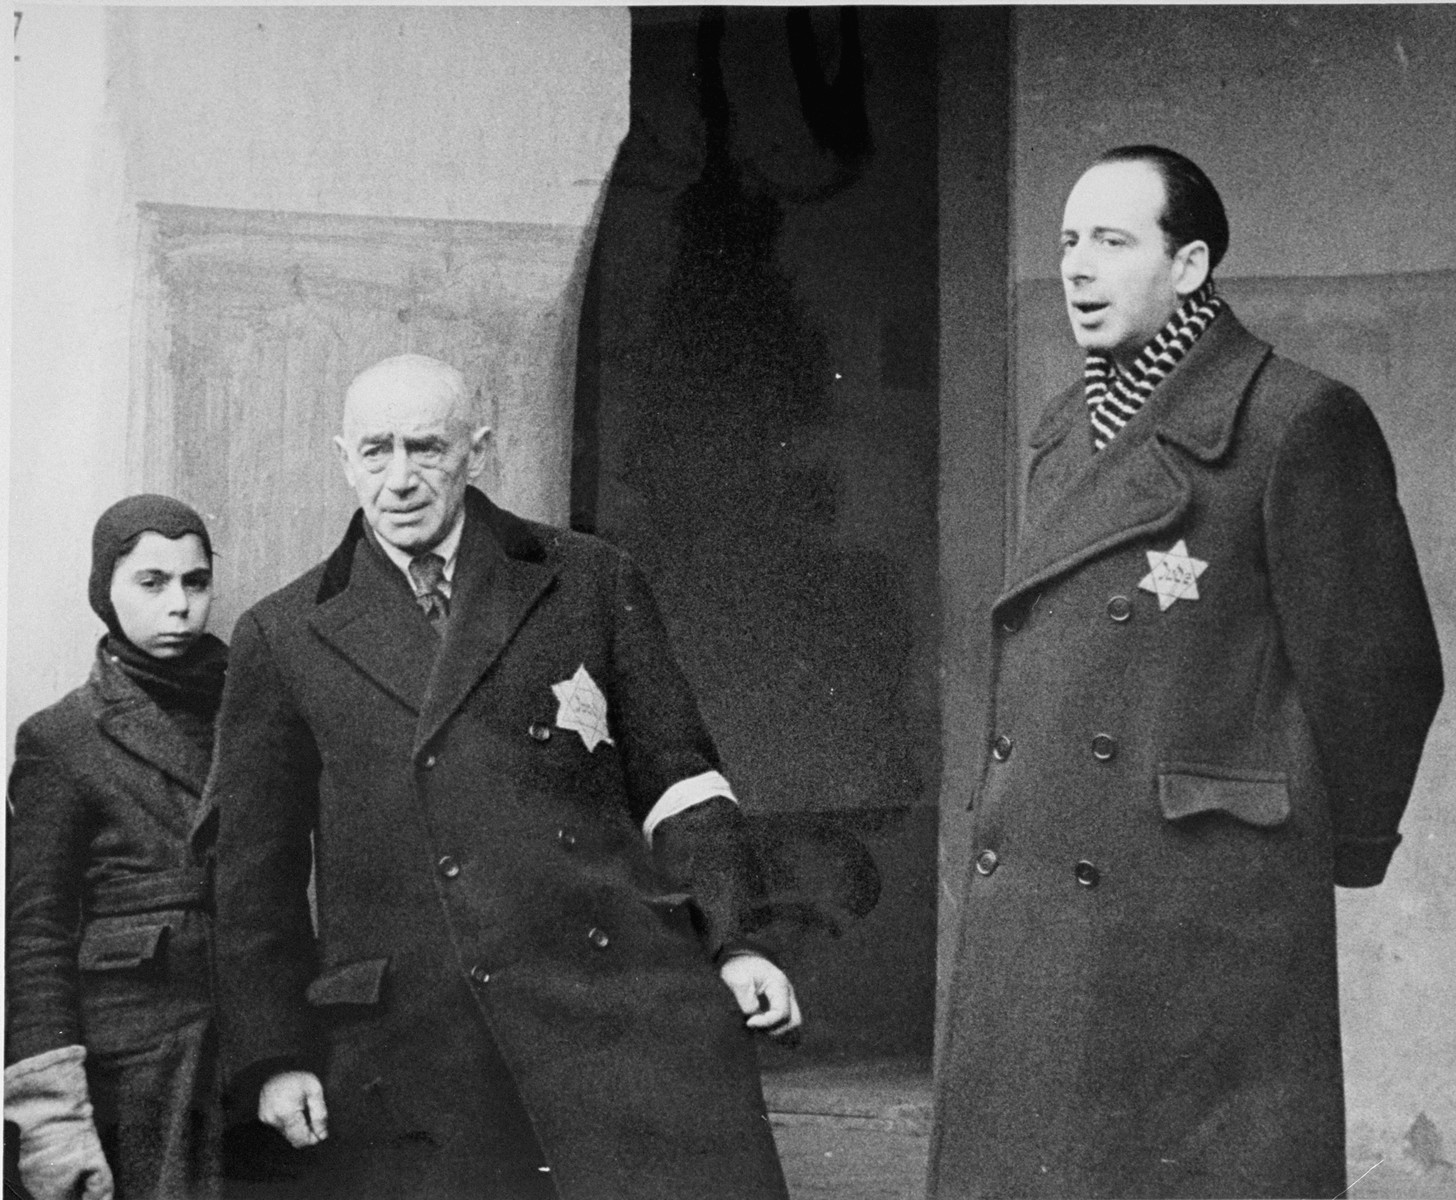 Dr. Pavel Eppstein, Chairman of the Theresienstadt Jewish council (Aeltestenrat), greets the newly arrived transport of Dutch Jews.  [oversized photo]